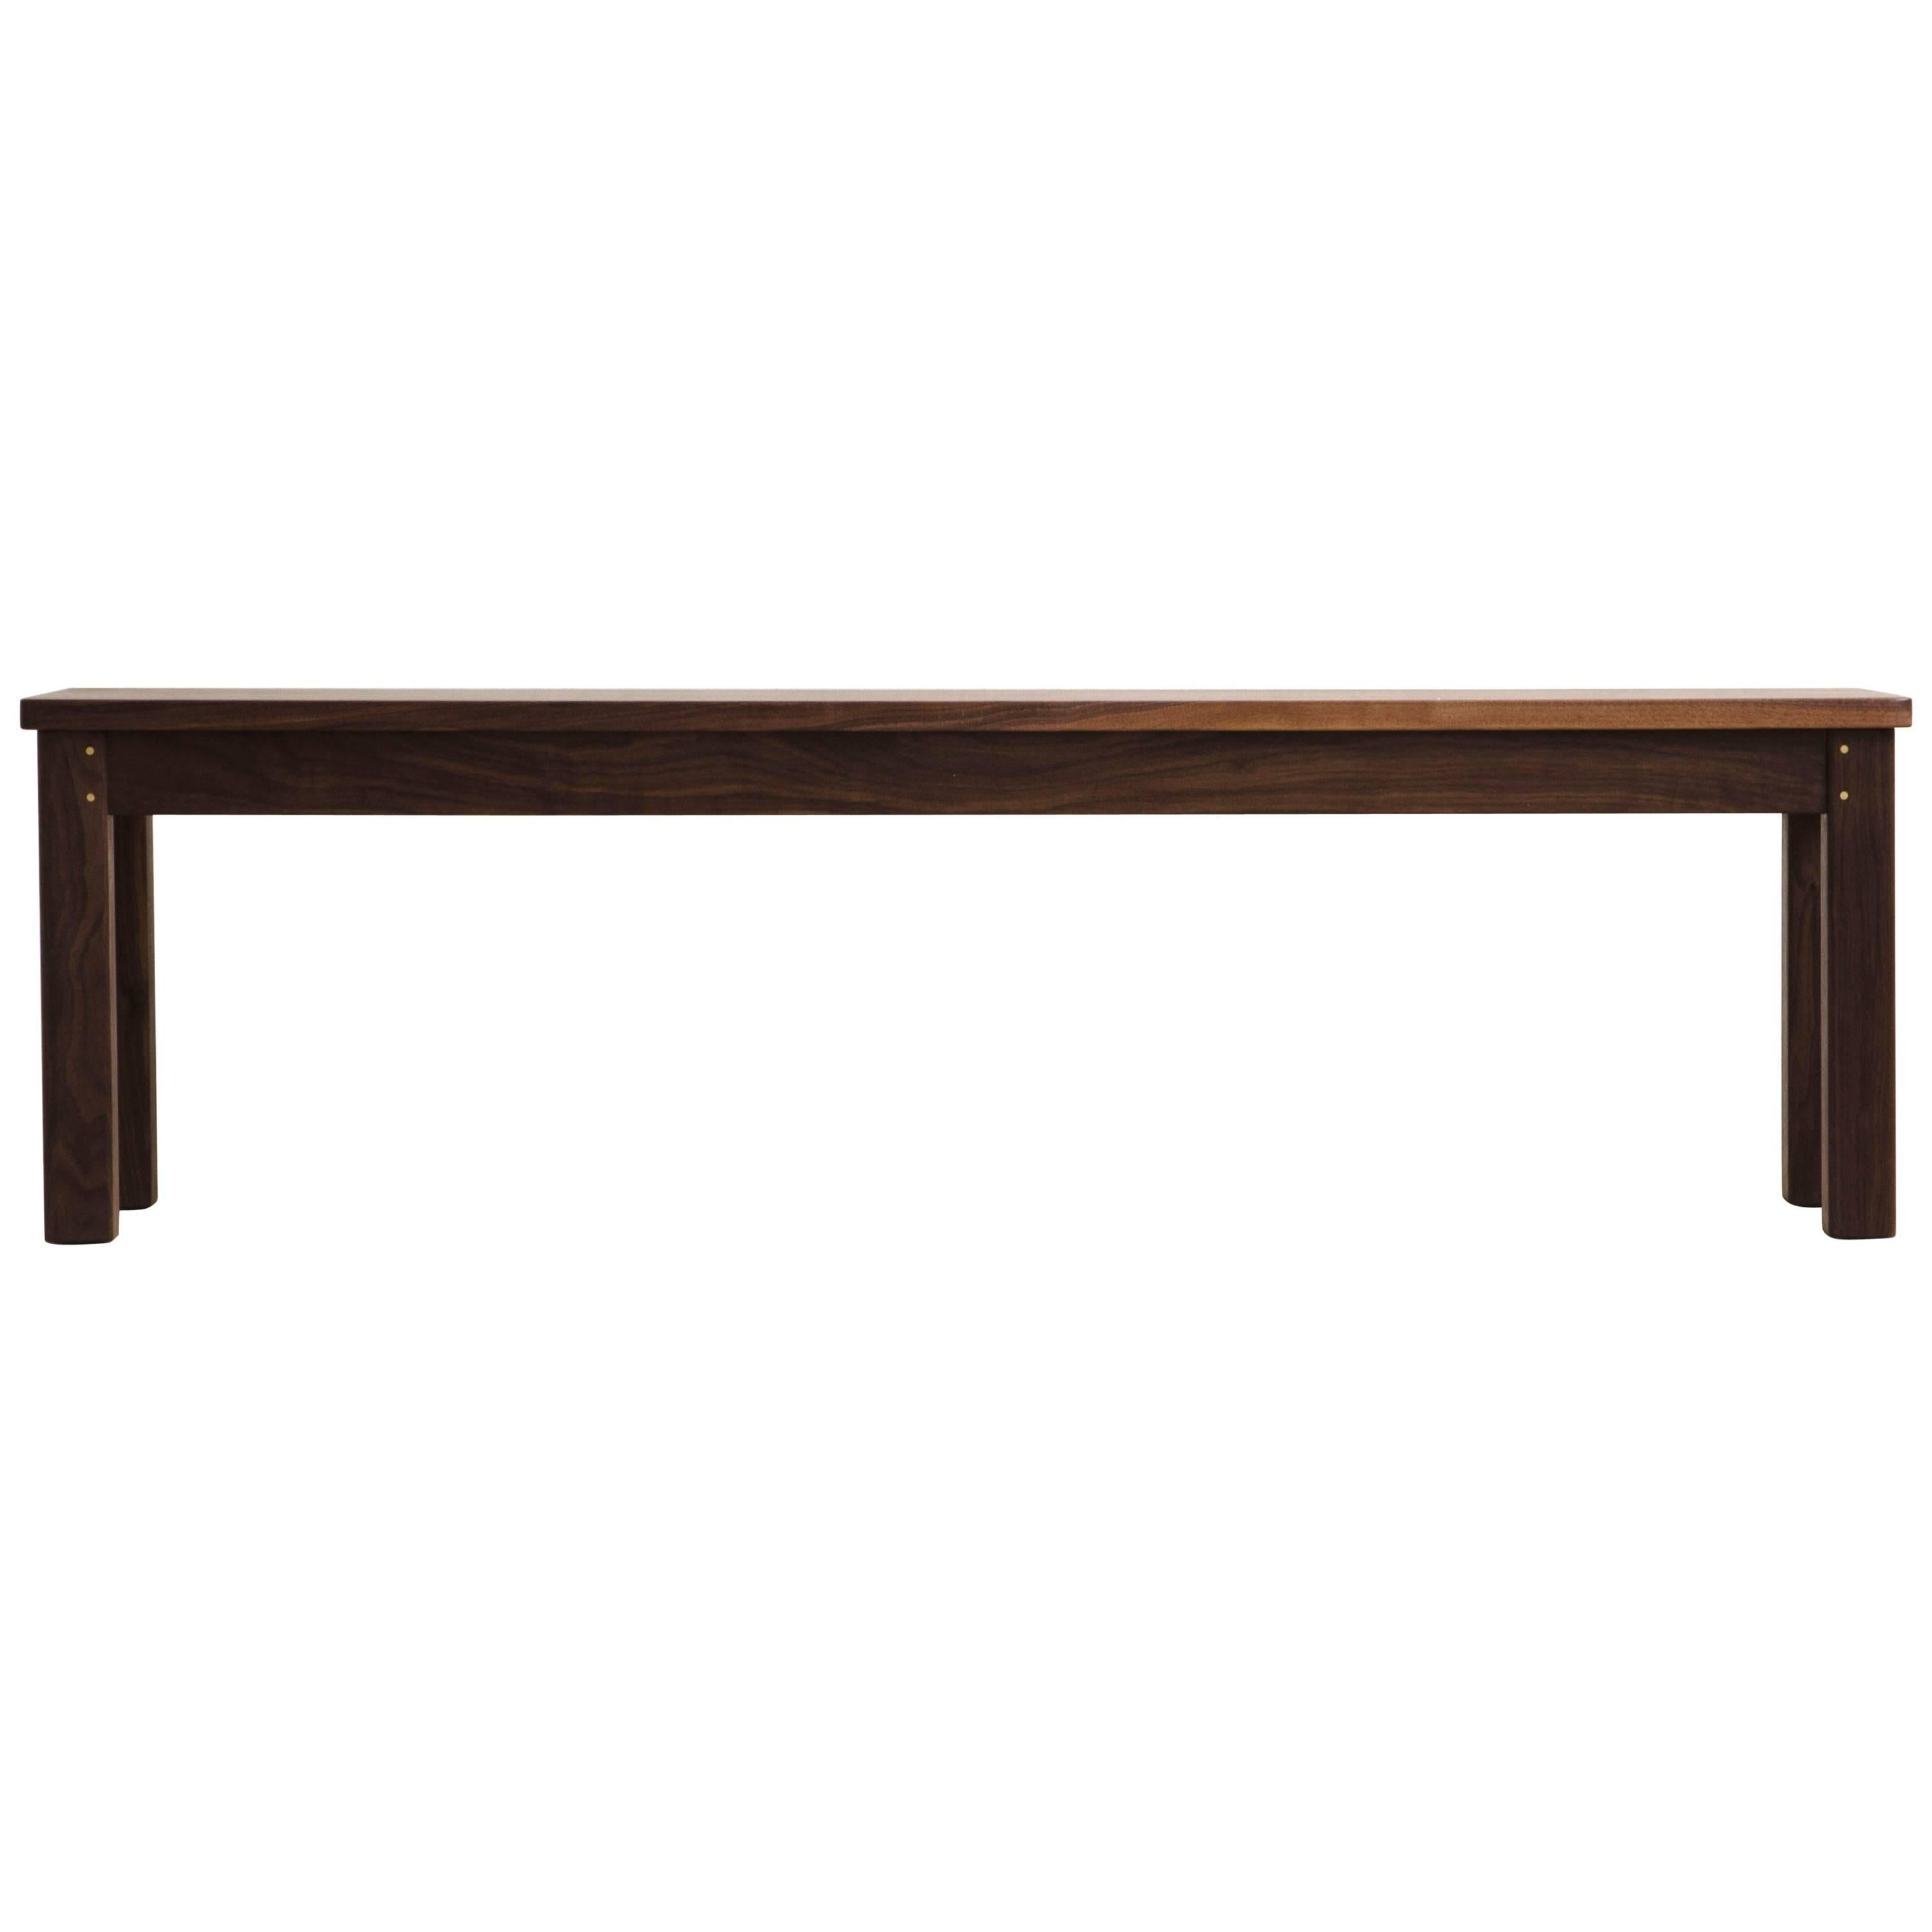 Small "Lore" Bench, Solid-Wood, Black Walnut, Modern Shaker-Style For Sale